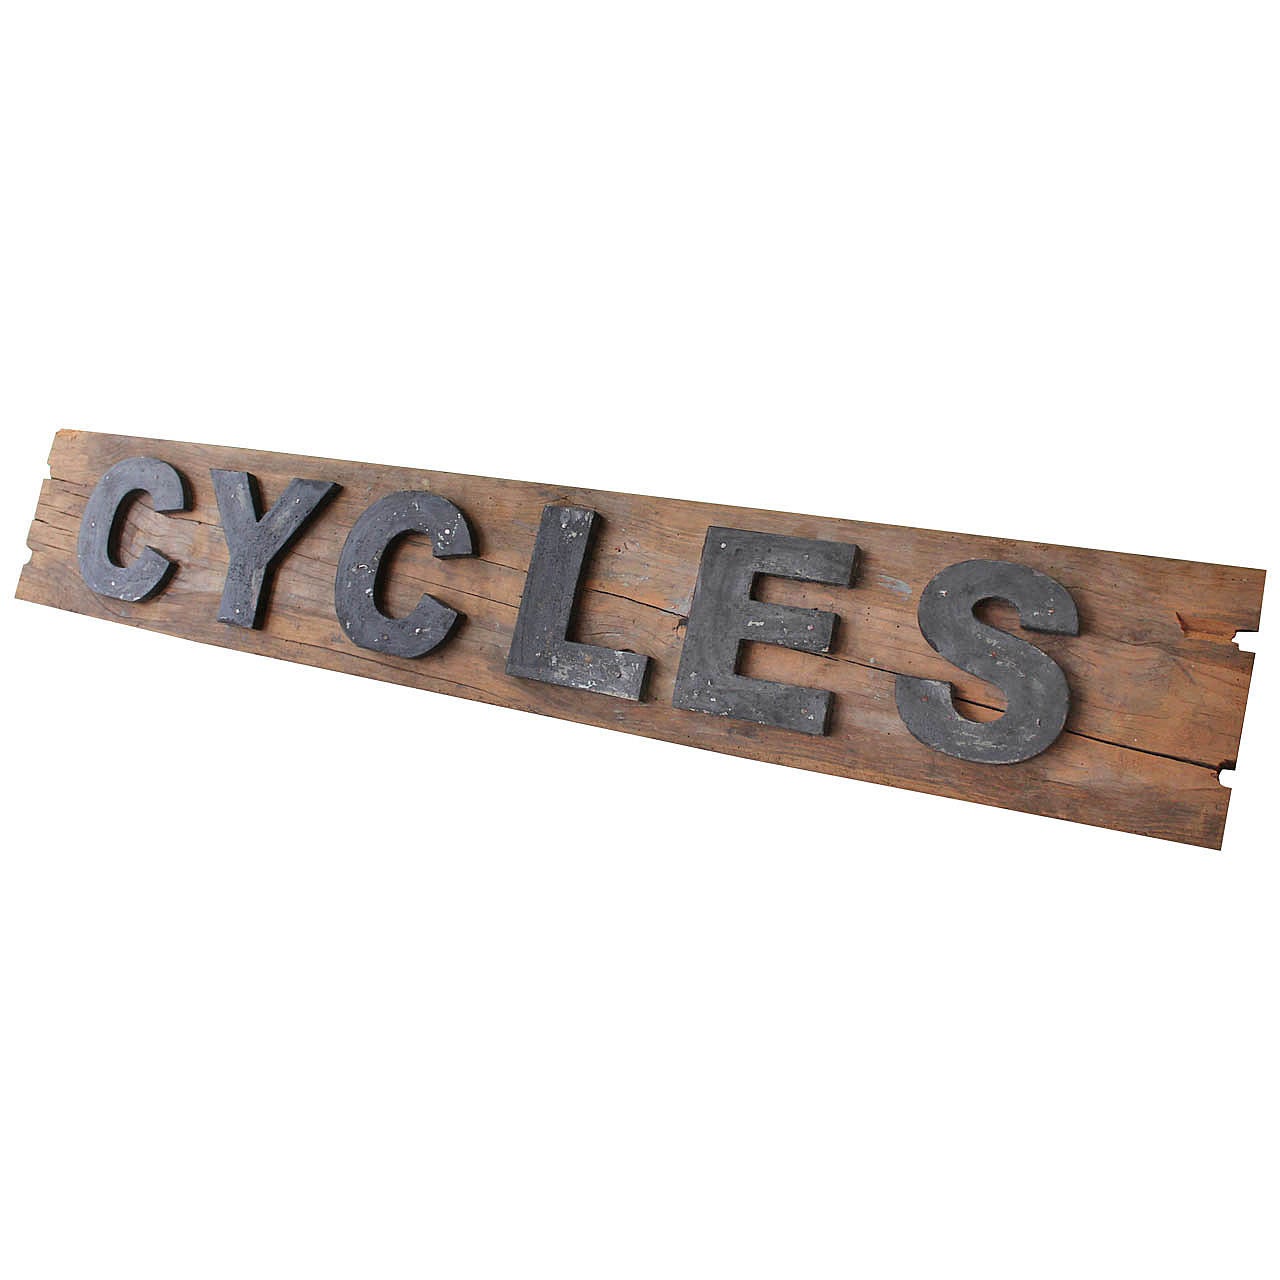 Decorative Wooden Letters "CYCLES" Sign, France, 1940s